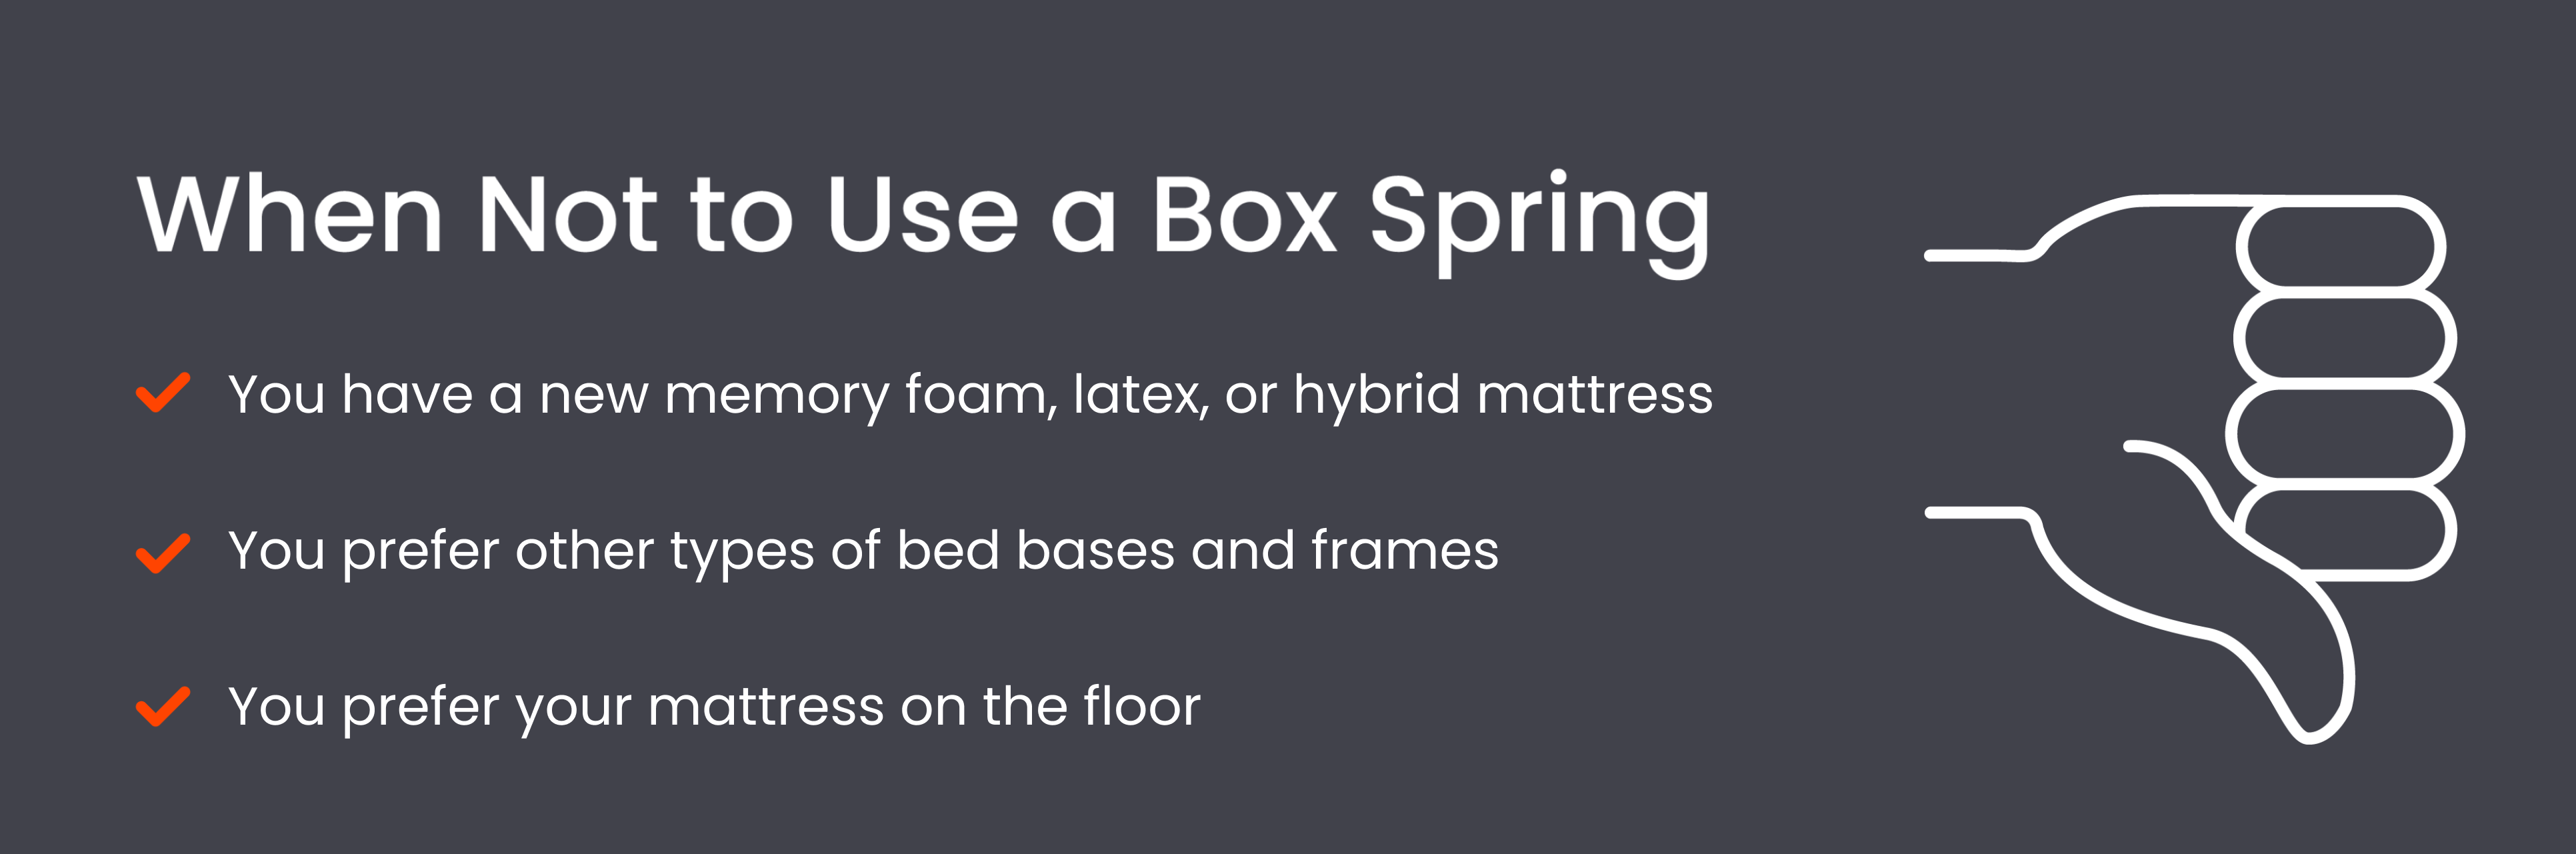 You shouldn’t use a box spring if you have a memory foam, latex, or hybrid mattress or prefer other bed bases.